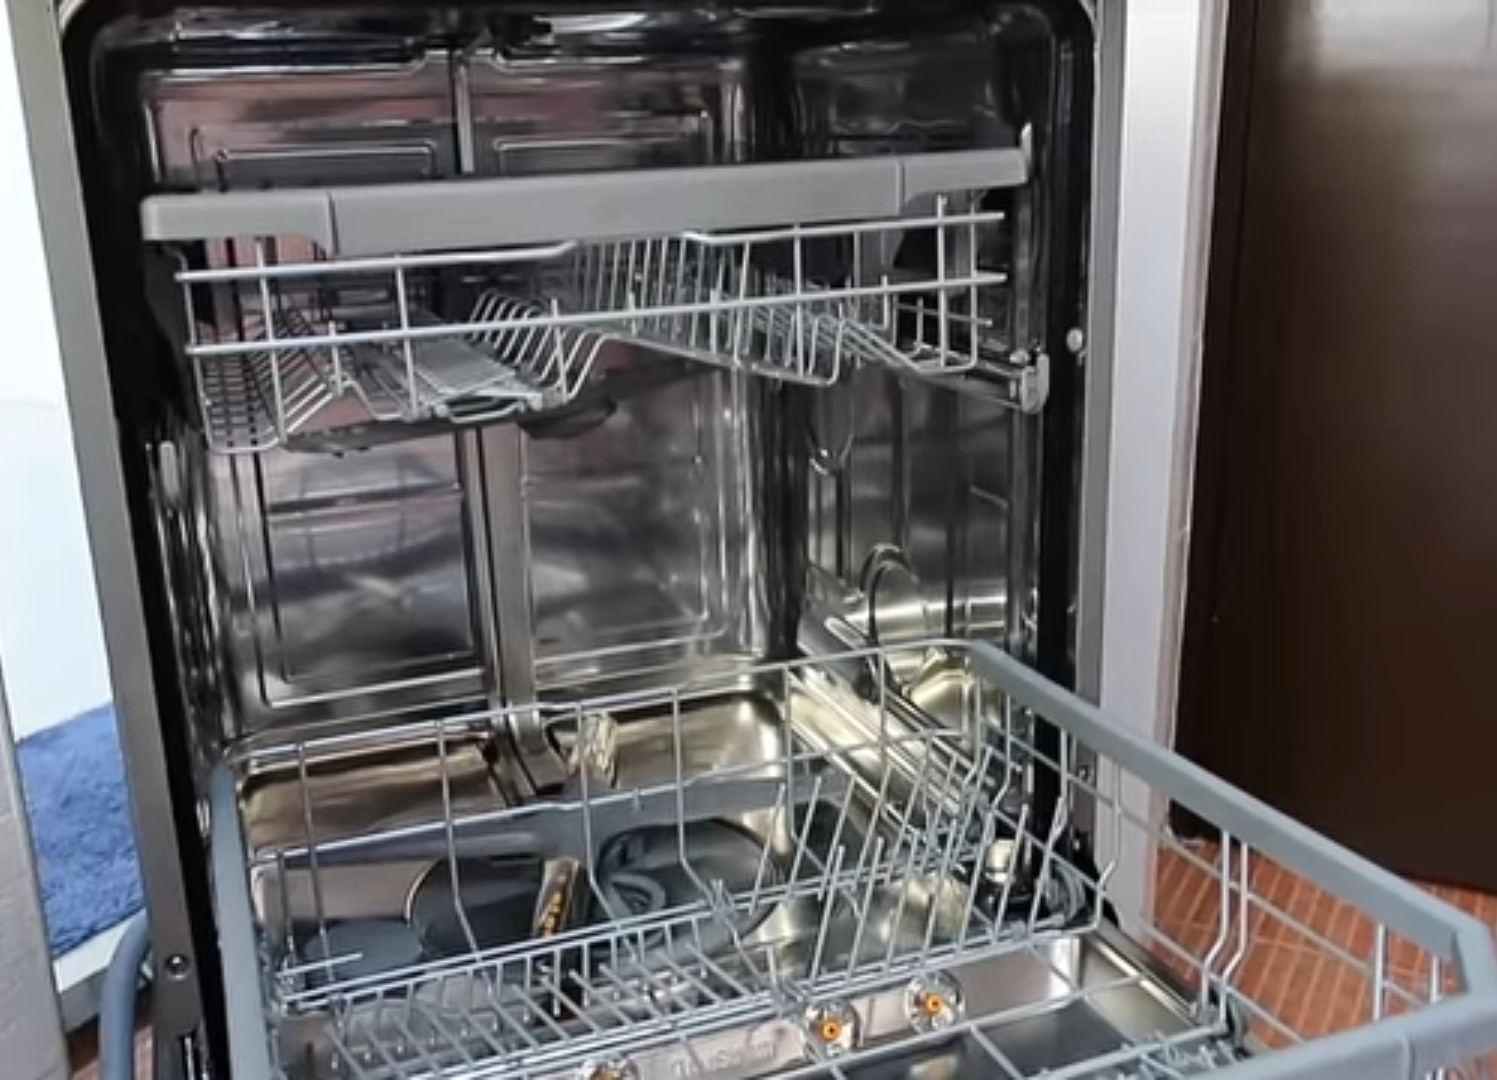 Dishwasher Repair & Cleaning Service Near Me